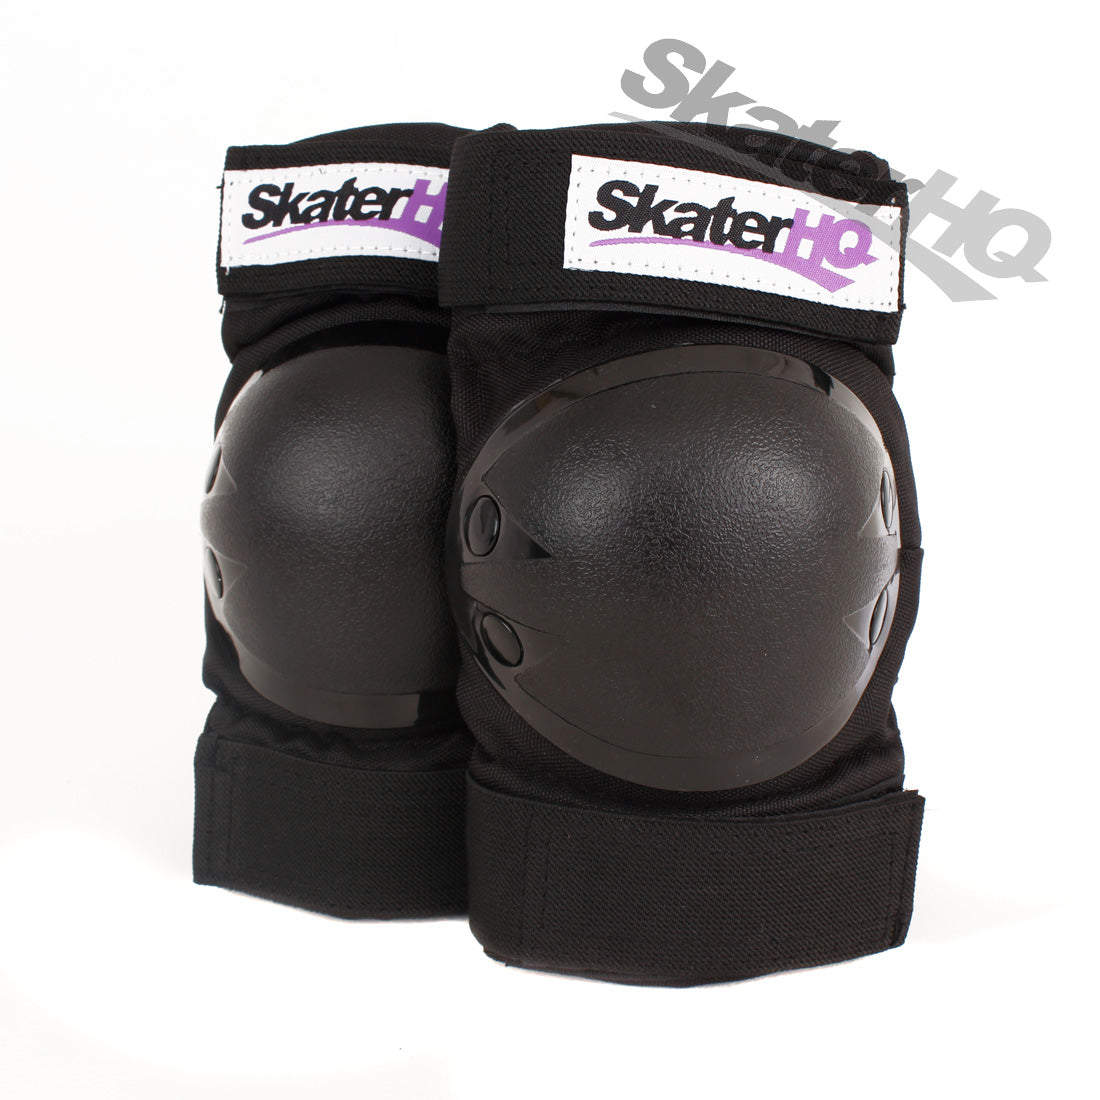 Skater HQ Elbow Pads - Medium Protective Gear